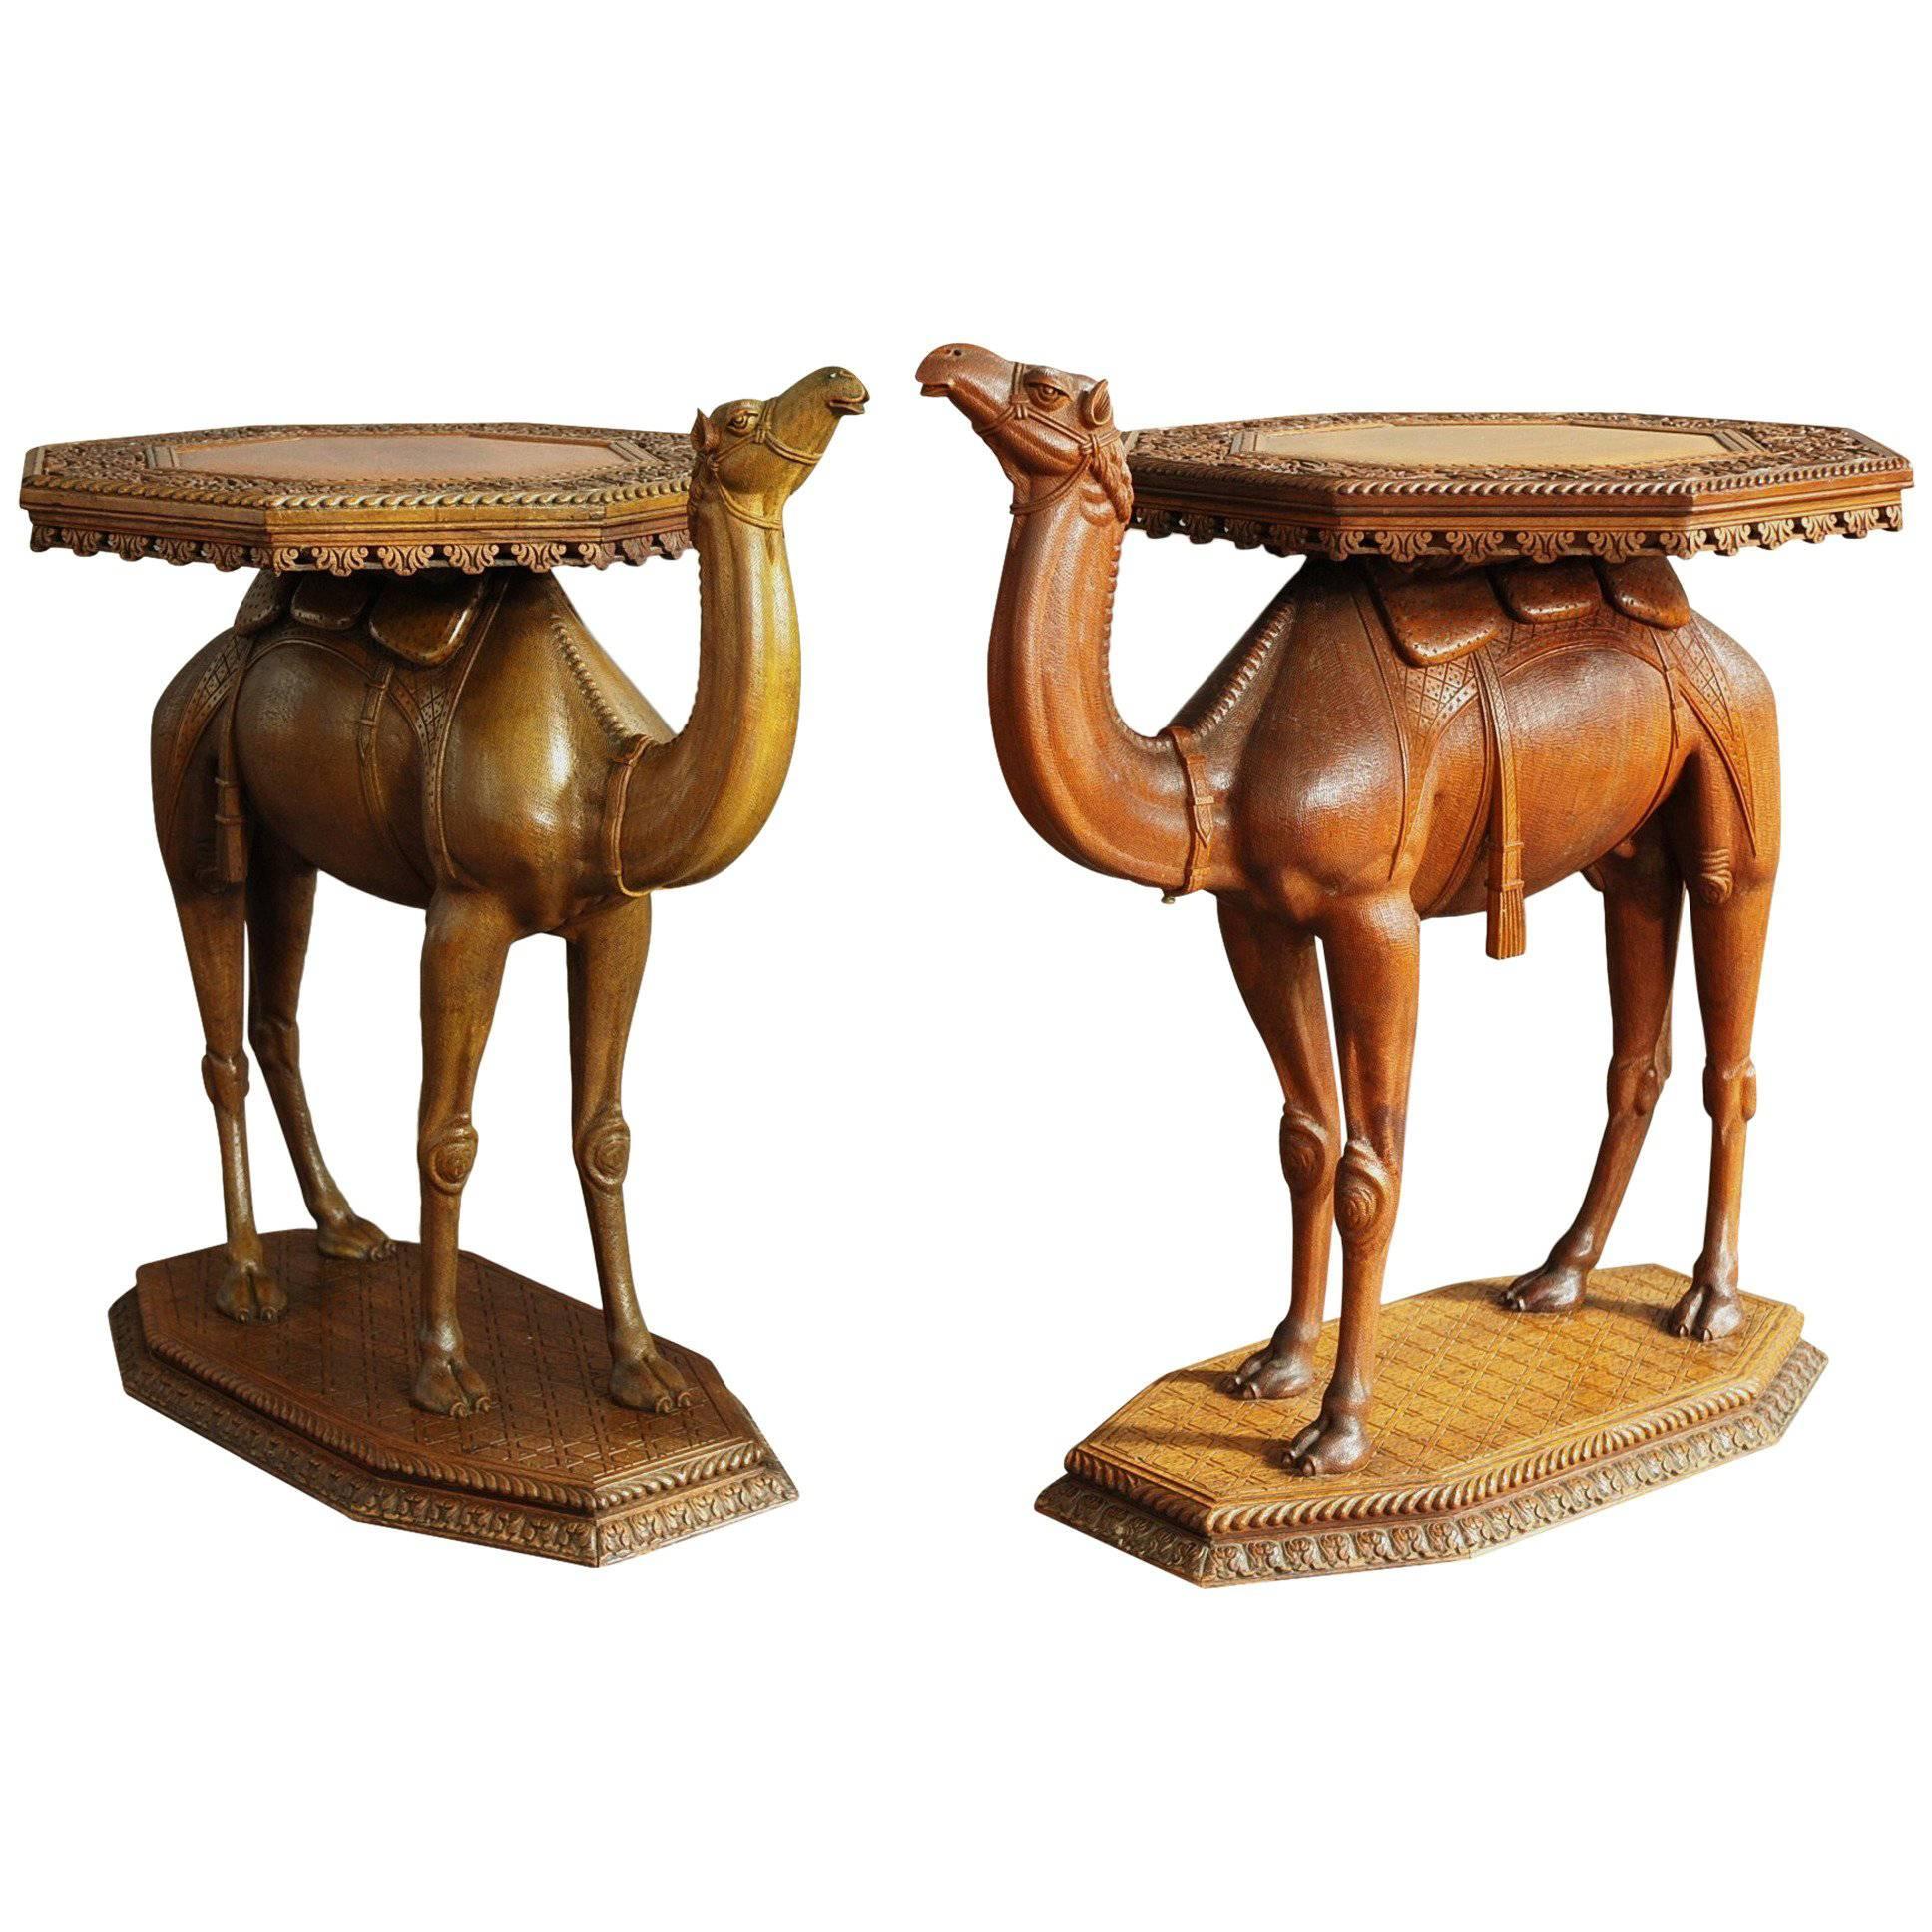 Near Pair of highly decorative Anglo-Indian Camel Tables For Sale